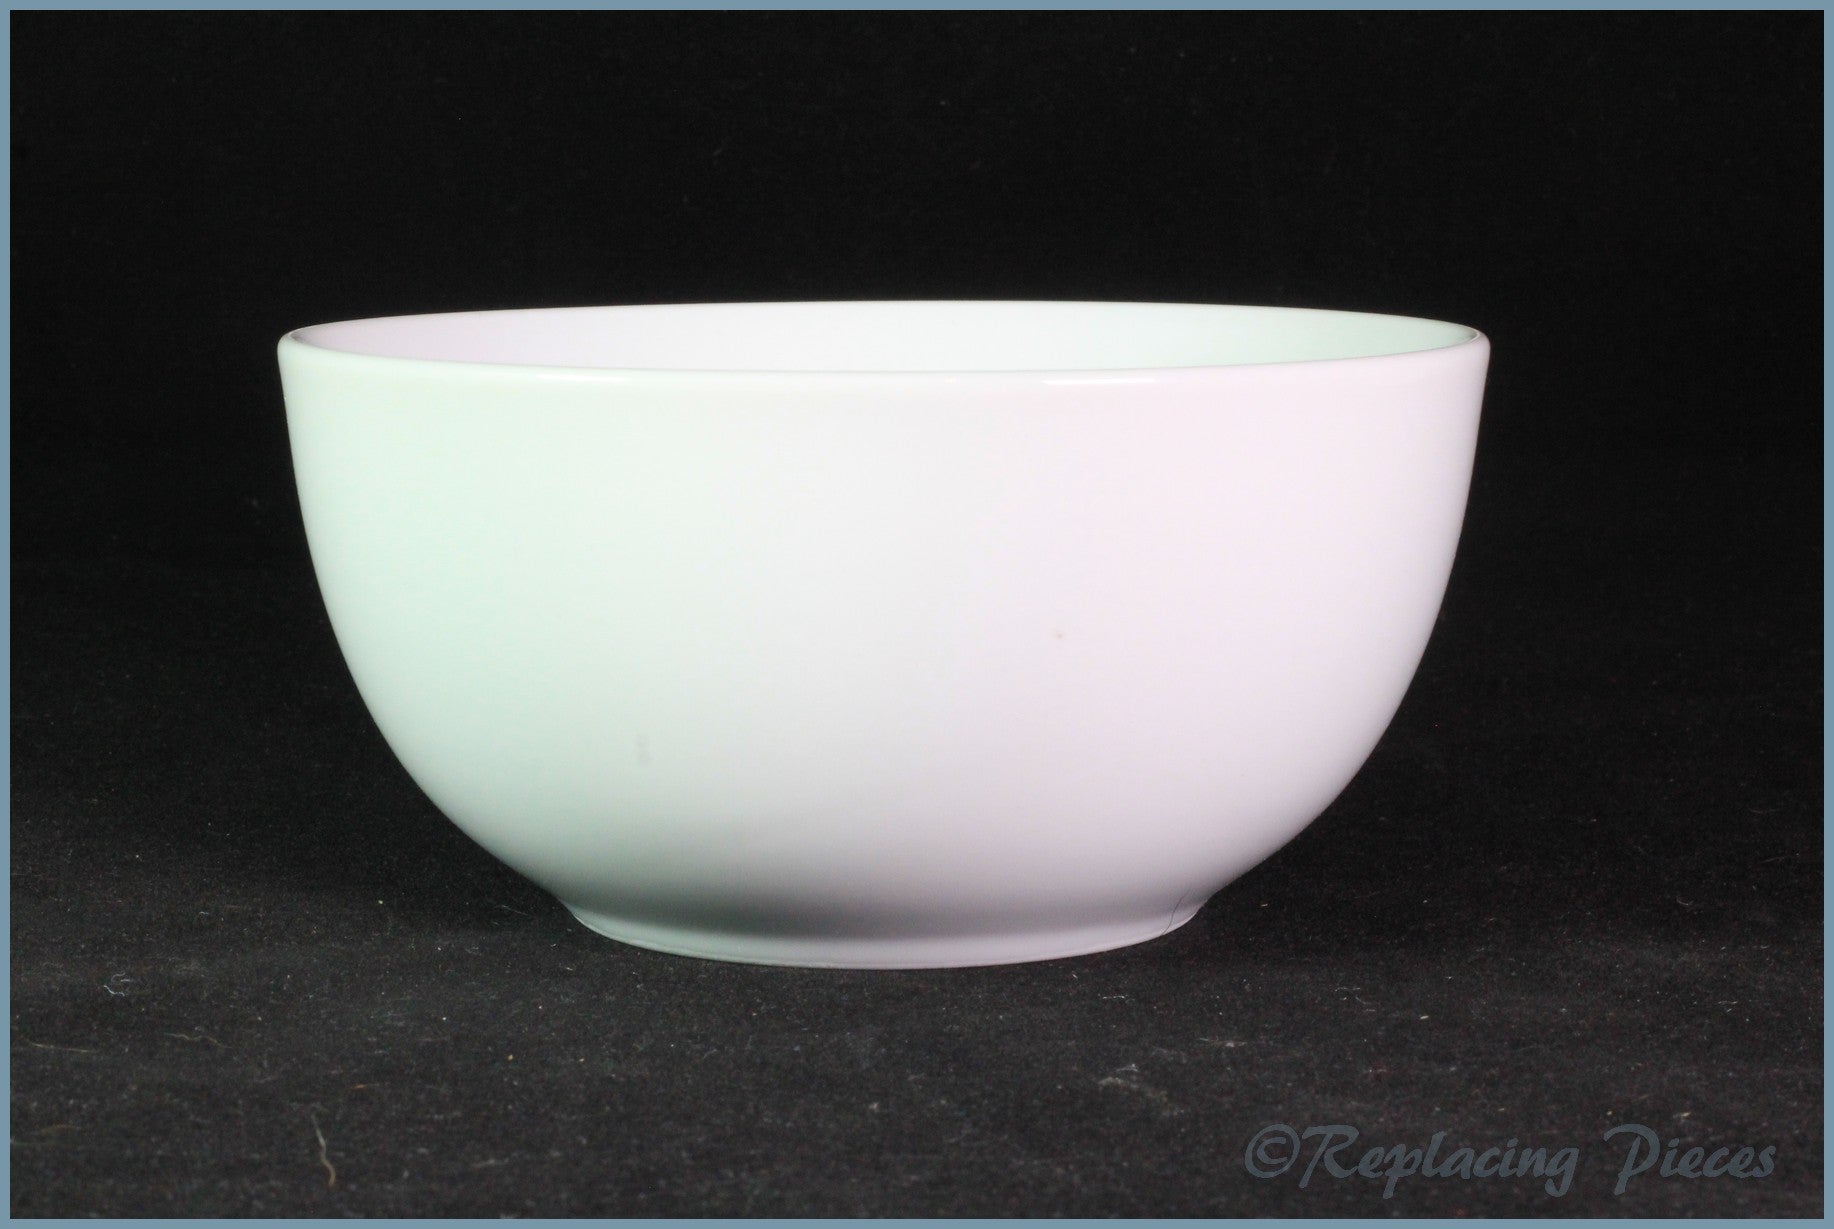 Marks & Spencer - White Essentials - 5 3/4" Cereal Bowl (Coupe Shape)